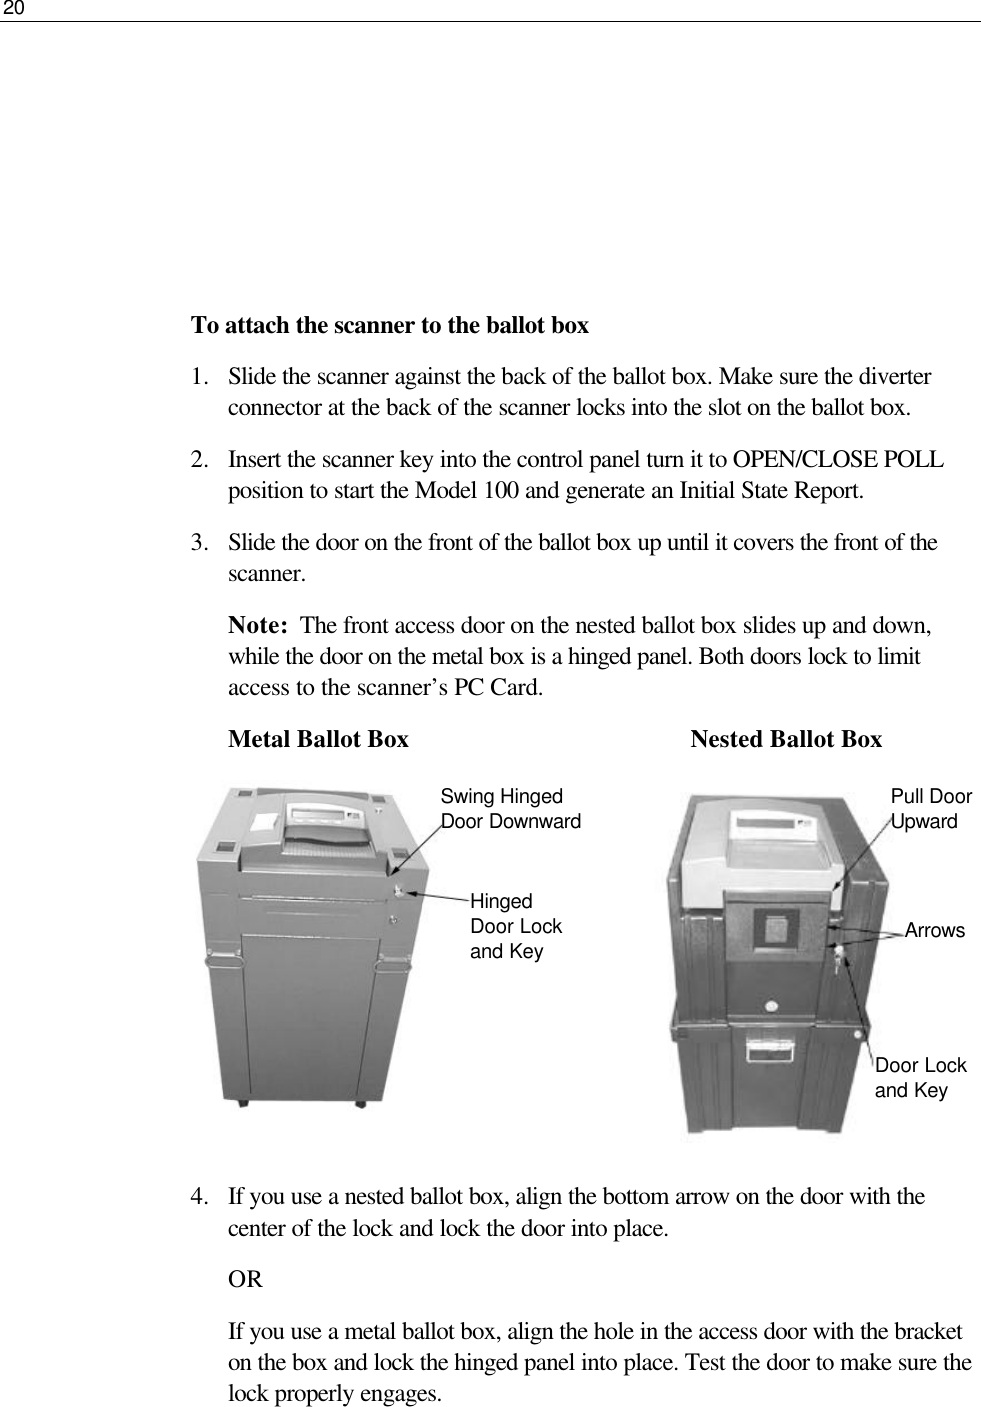 20       To attach the scanner to the ballot box 1.  Slide the scanner against the back of the ballot box. Make sure the diverter connector at the back of the scanner locks into the slot on the ballot box.  2.  Insert the scanner key into the control panel turn it to OPEN/CLOSE POLL position to start the Model 100 and generate an Initial State Report.  3.  Slide the door on the front of the ballot box up until it covers the front of the scanner.  Note:  The front access door on the nested ballot box slides up and down, while the door on the metal box is a hinged panel. Both doors lock to limit access to the scanner’s PC Card. Metal Ballot Box                 Nested Ballot Box         4.  If you use a nested ballot box, align the bottom arrow on the door with the center of the lock and lock the door into place. OR If you use a metal ballot box, align the hole in the access door with the bracket on the box and lock the hinged panel into place. Test the door to make sure the lock properly engages.  Swing Hinged Door Downward Hinged Door Lock and Key Pull Door Upward Arrows Door Lock and Key 